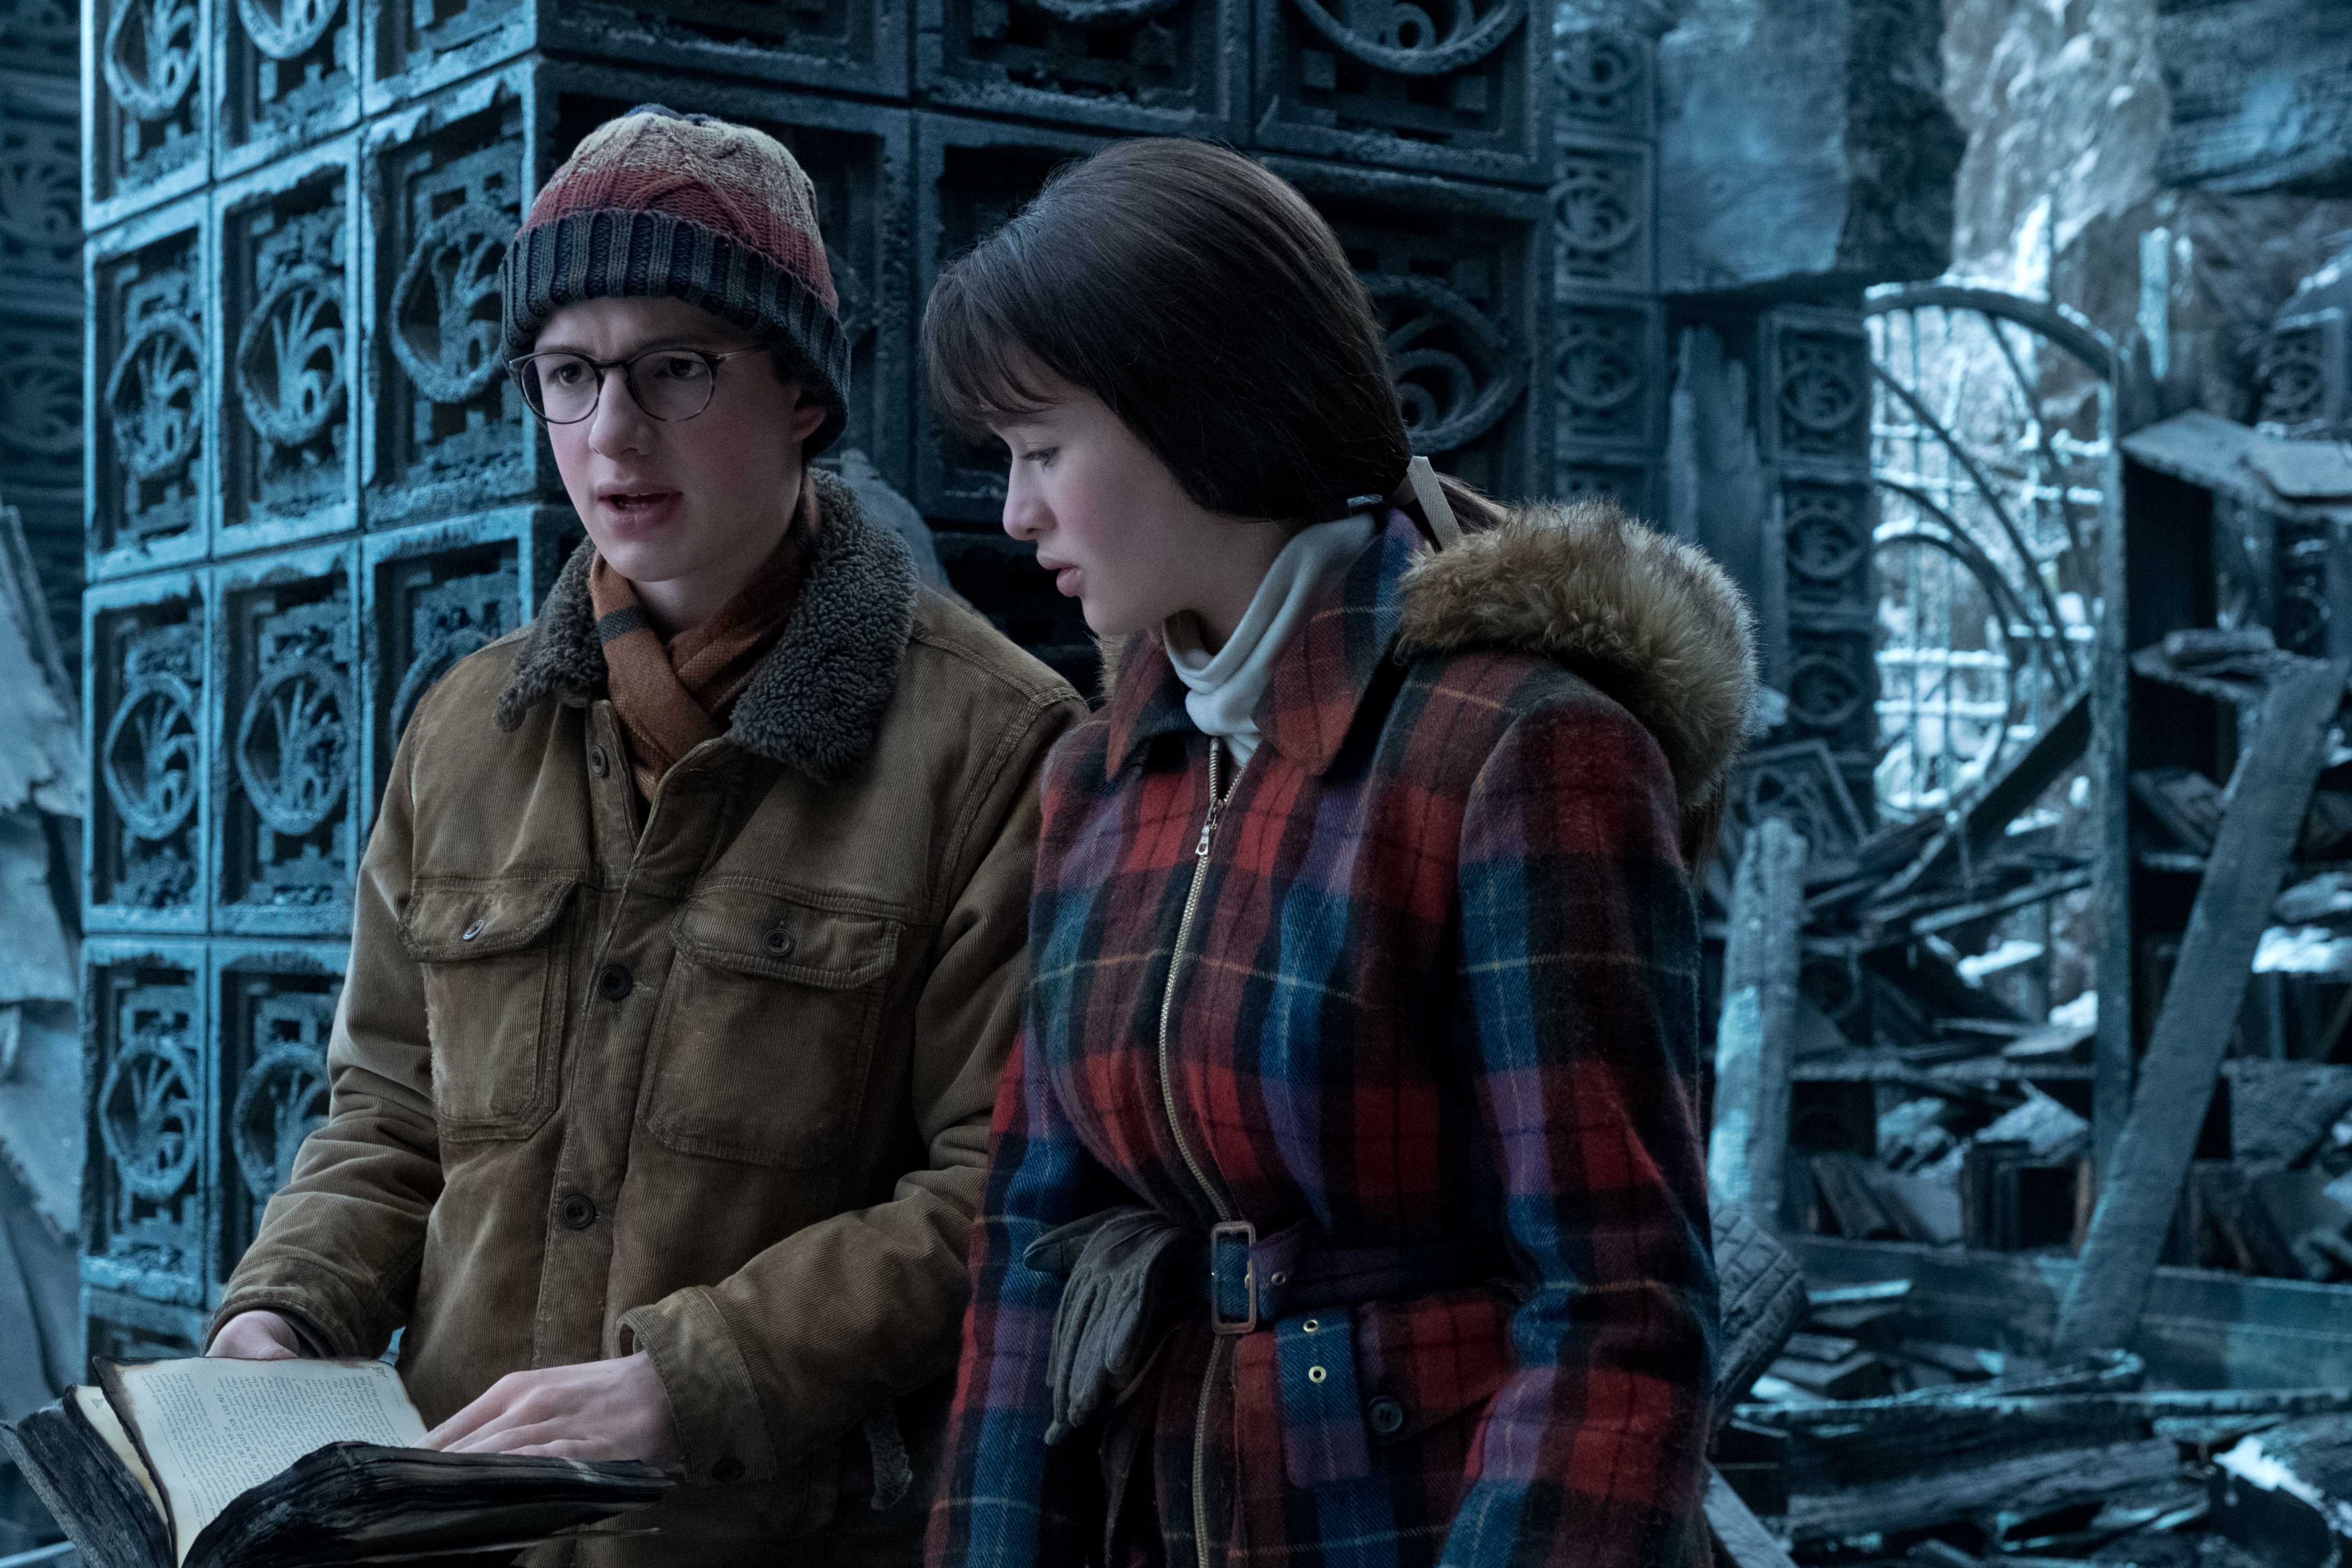 A Series of Unfortunate Events: Season Three is a beautifully captured